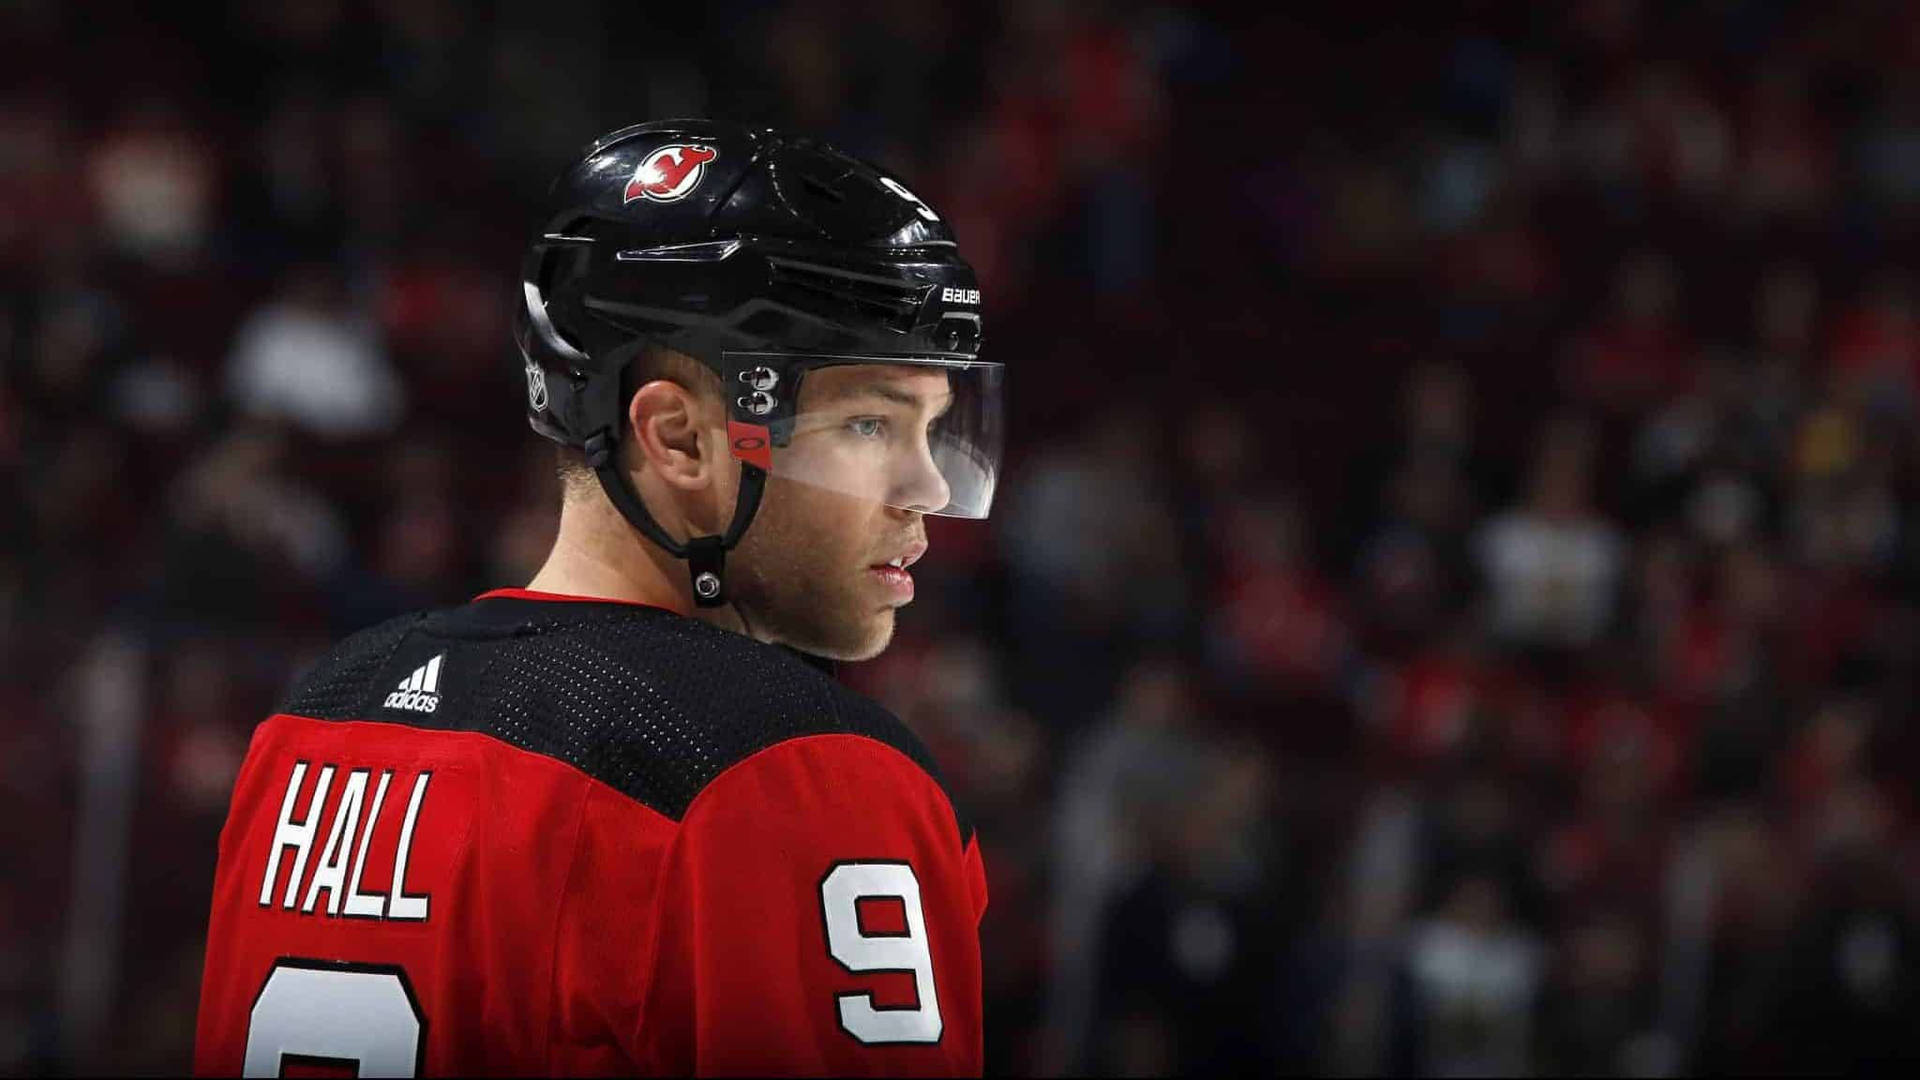 Devils winger Taylor Hall will miss 3-4 weeks recovering from knee